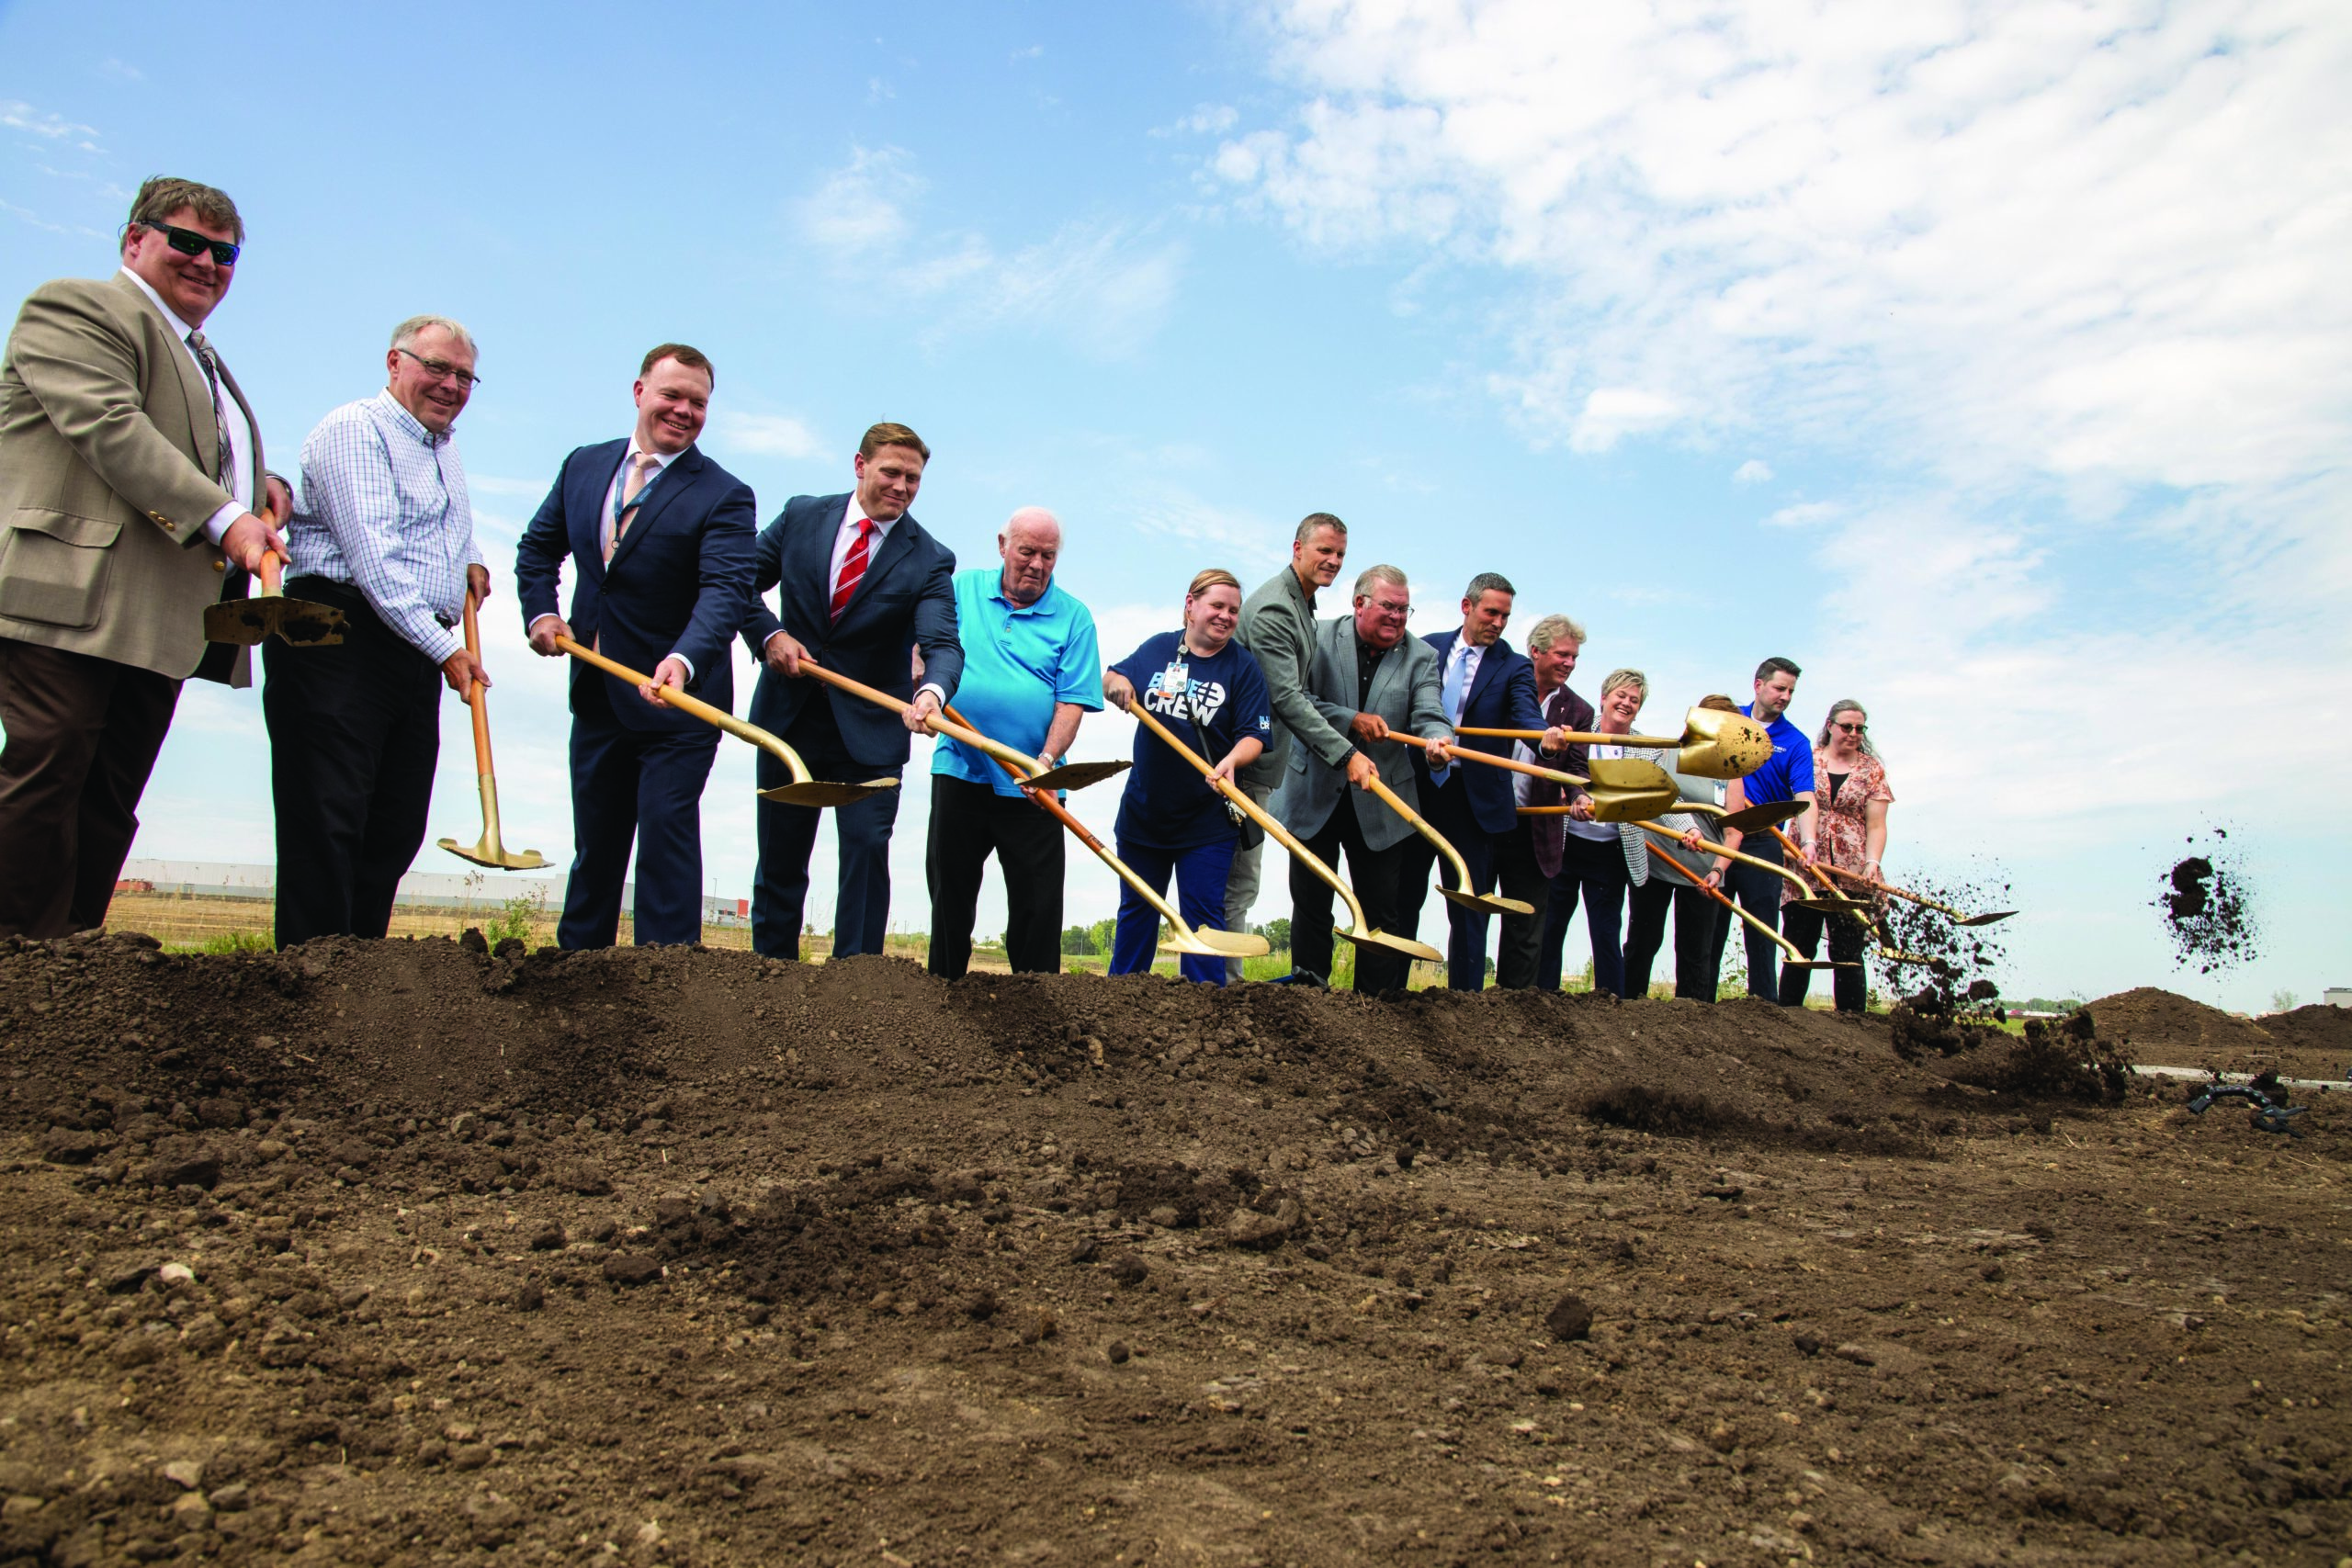 Sanford Health and community leaders line up with gold shovels, smiling and tossing scoops of dirt in the air.